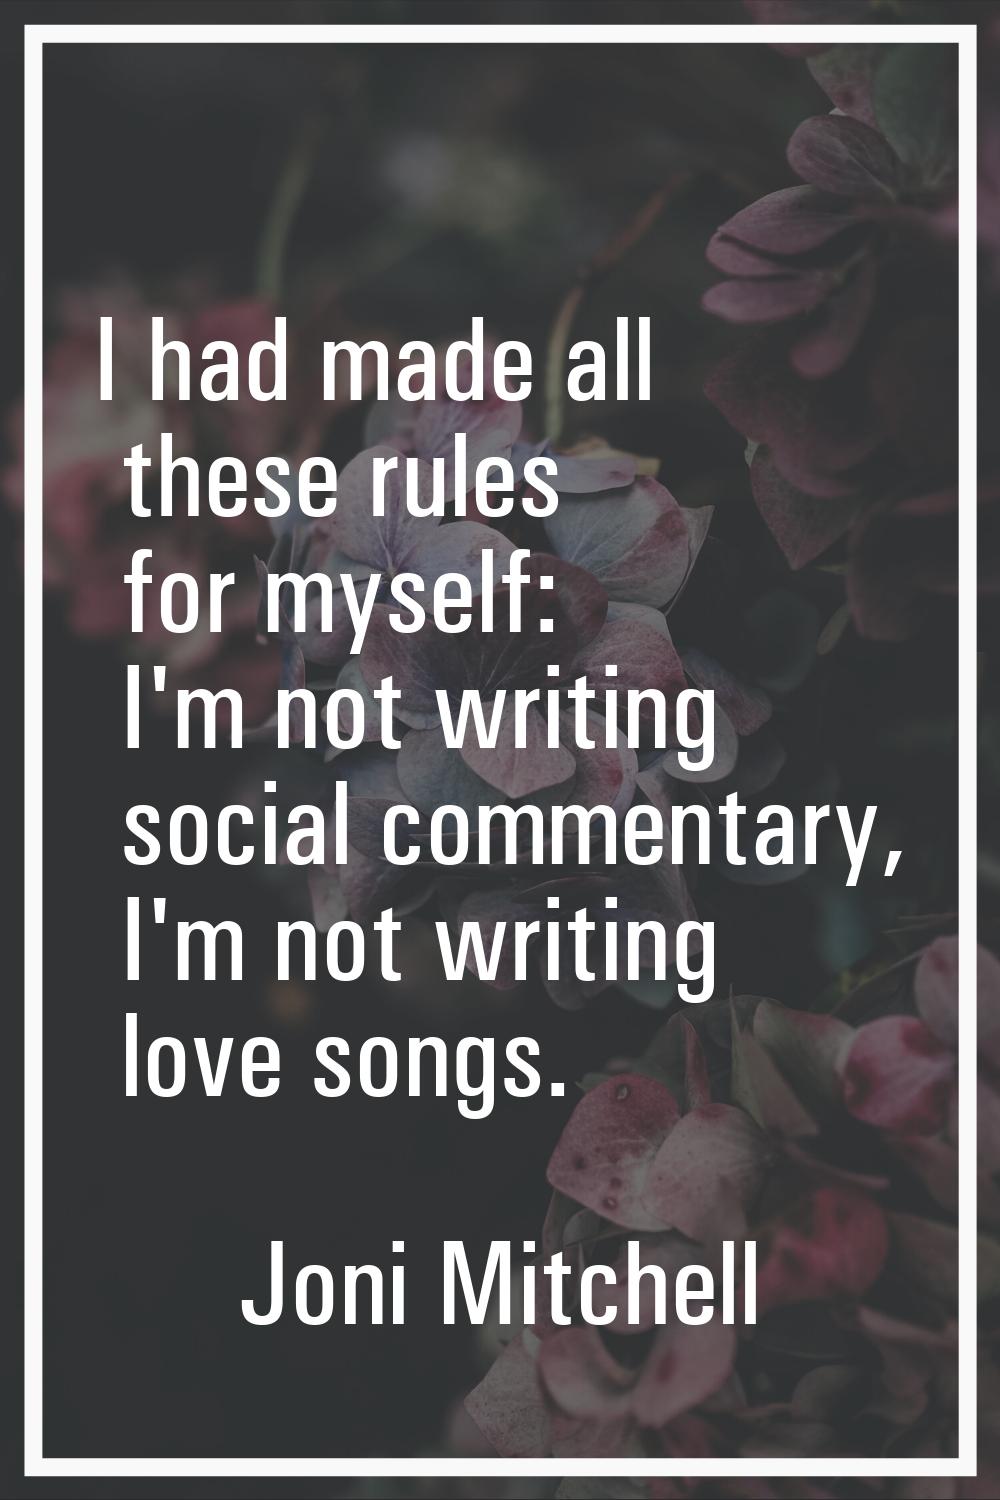 I had made all these rules for myself: I'm not writing social commentary, I'm not writing love song